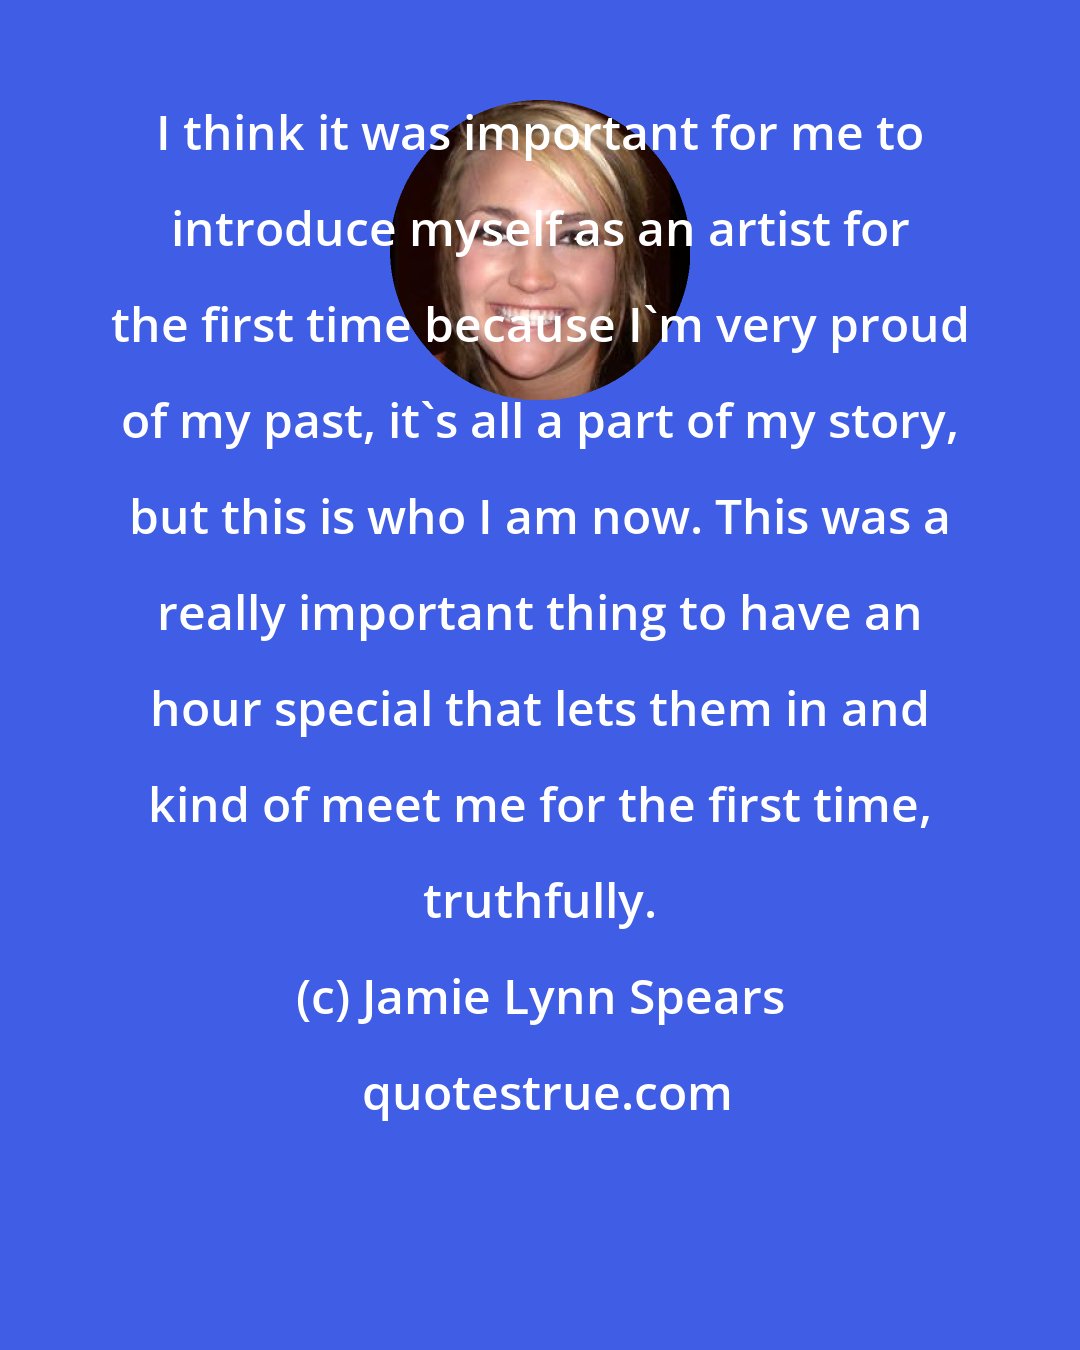 Jamie Lynn Spears: I think it was important for me to introduce myself as an artist for the first time because I'm very proud of my past, it's all a part of my story, but this is who I am now. This was a really important thing to have an hour special that lets them in and kind of meet me for the first time, truthfully.